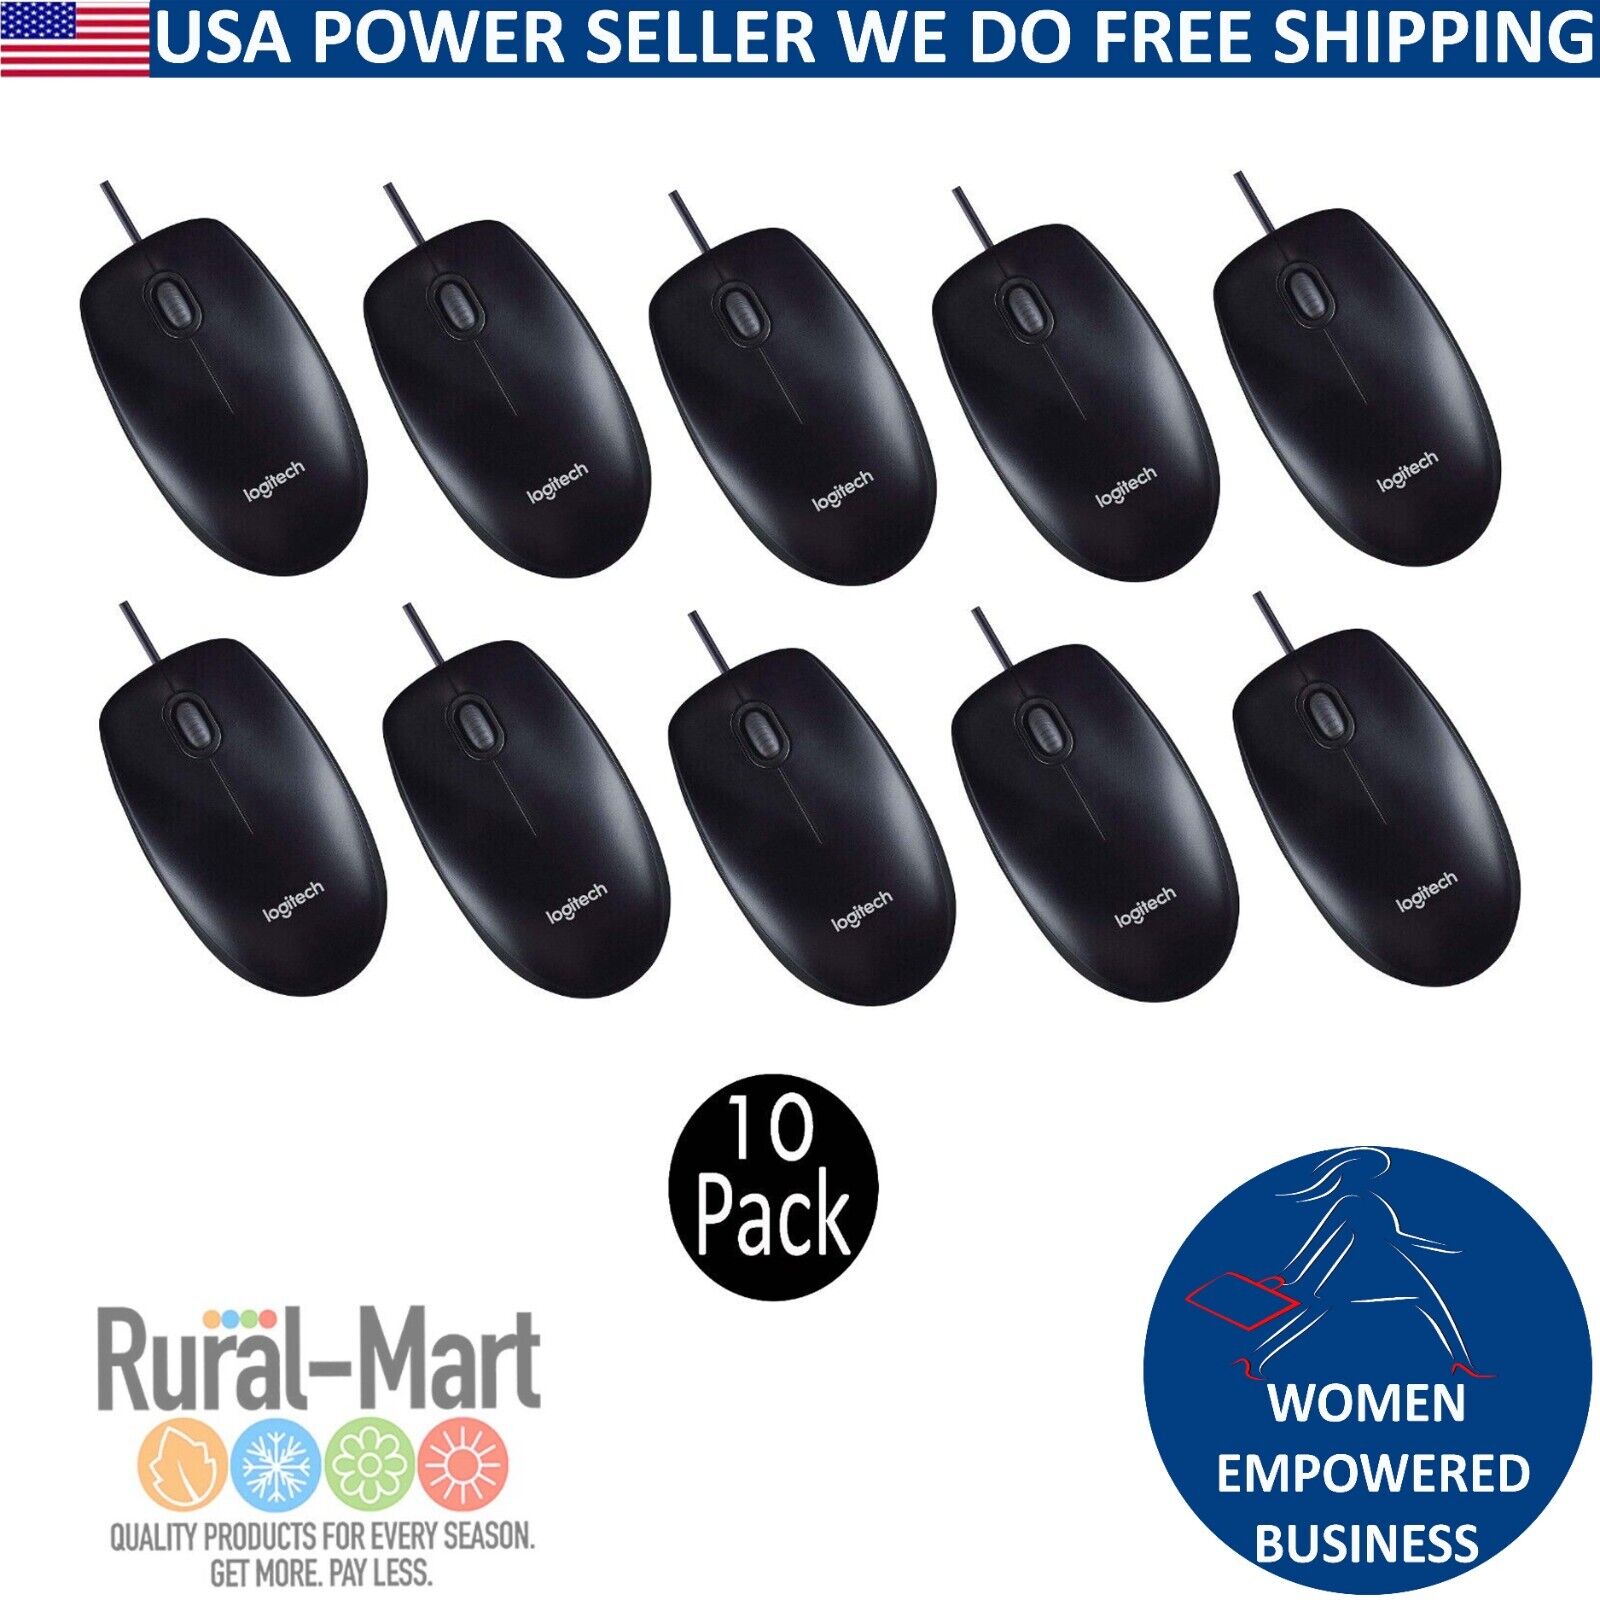 10 pack Logitech M90 Wired USB Mouse